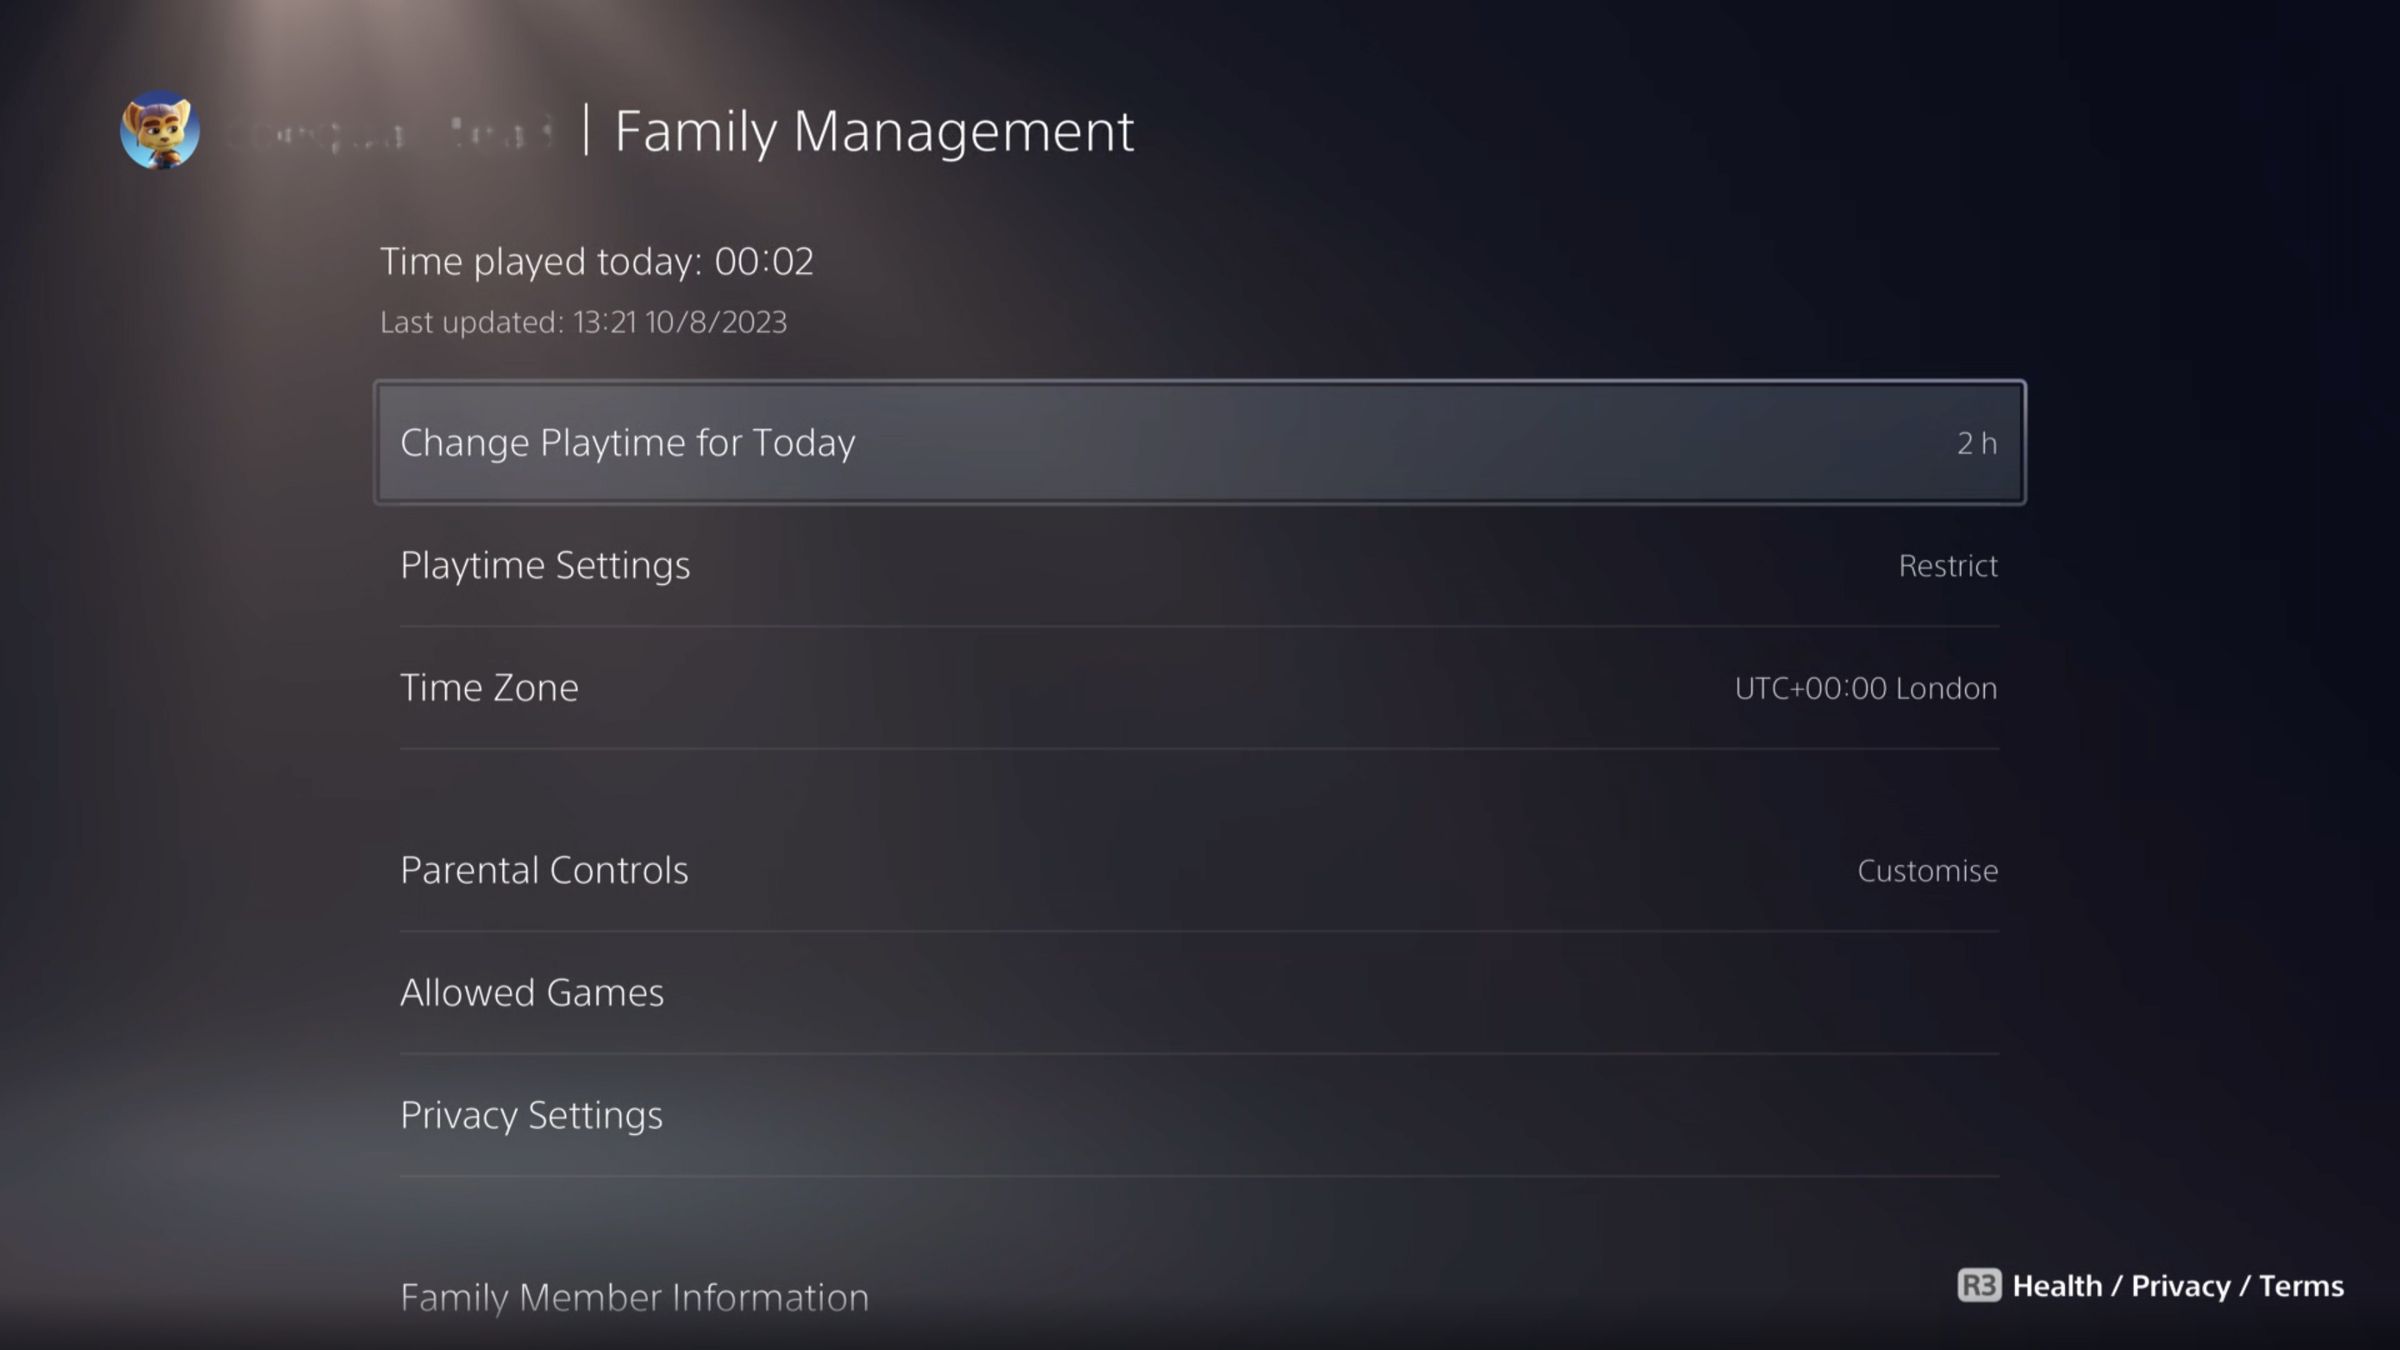 Page headed Family Management with a list of choices and info like Time Played Today, Change Playtime for Today, Playtime Settings, and Time Zone.